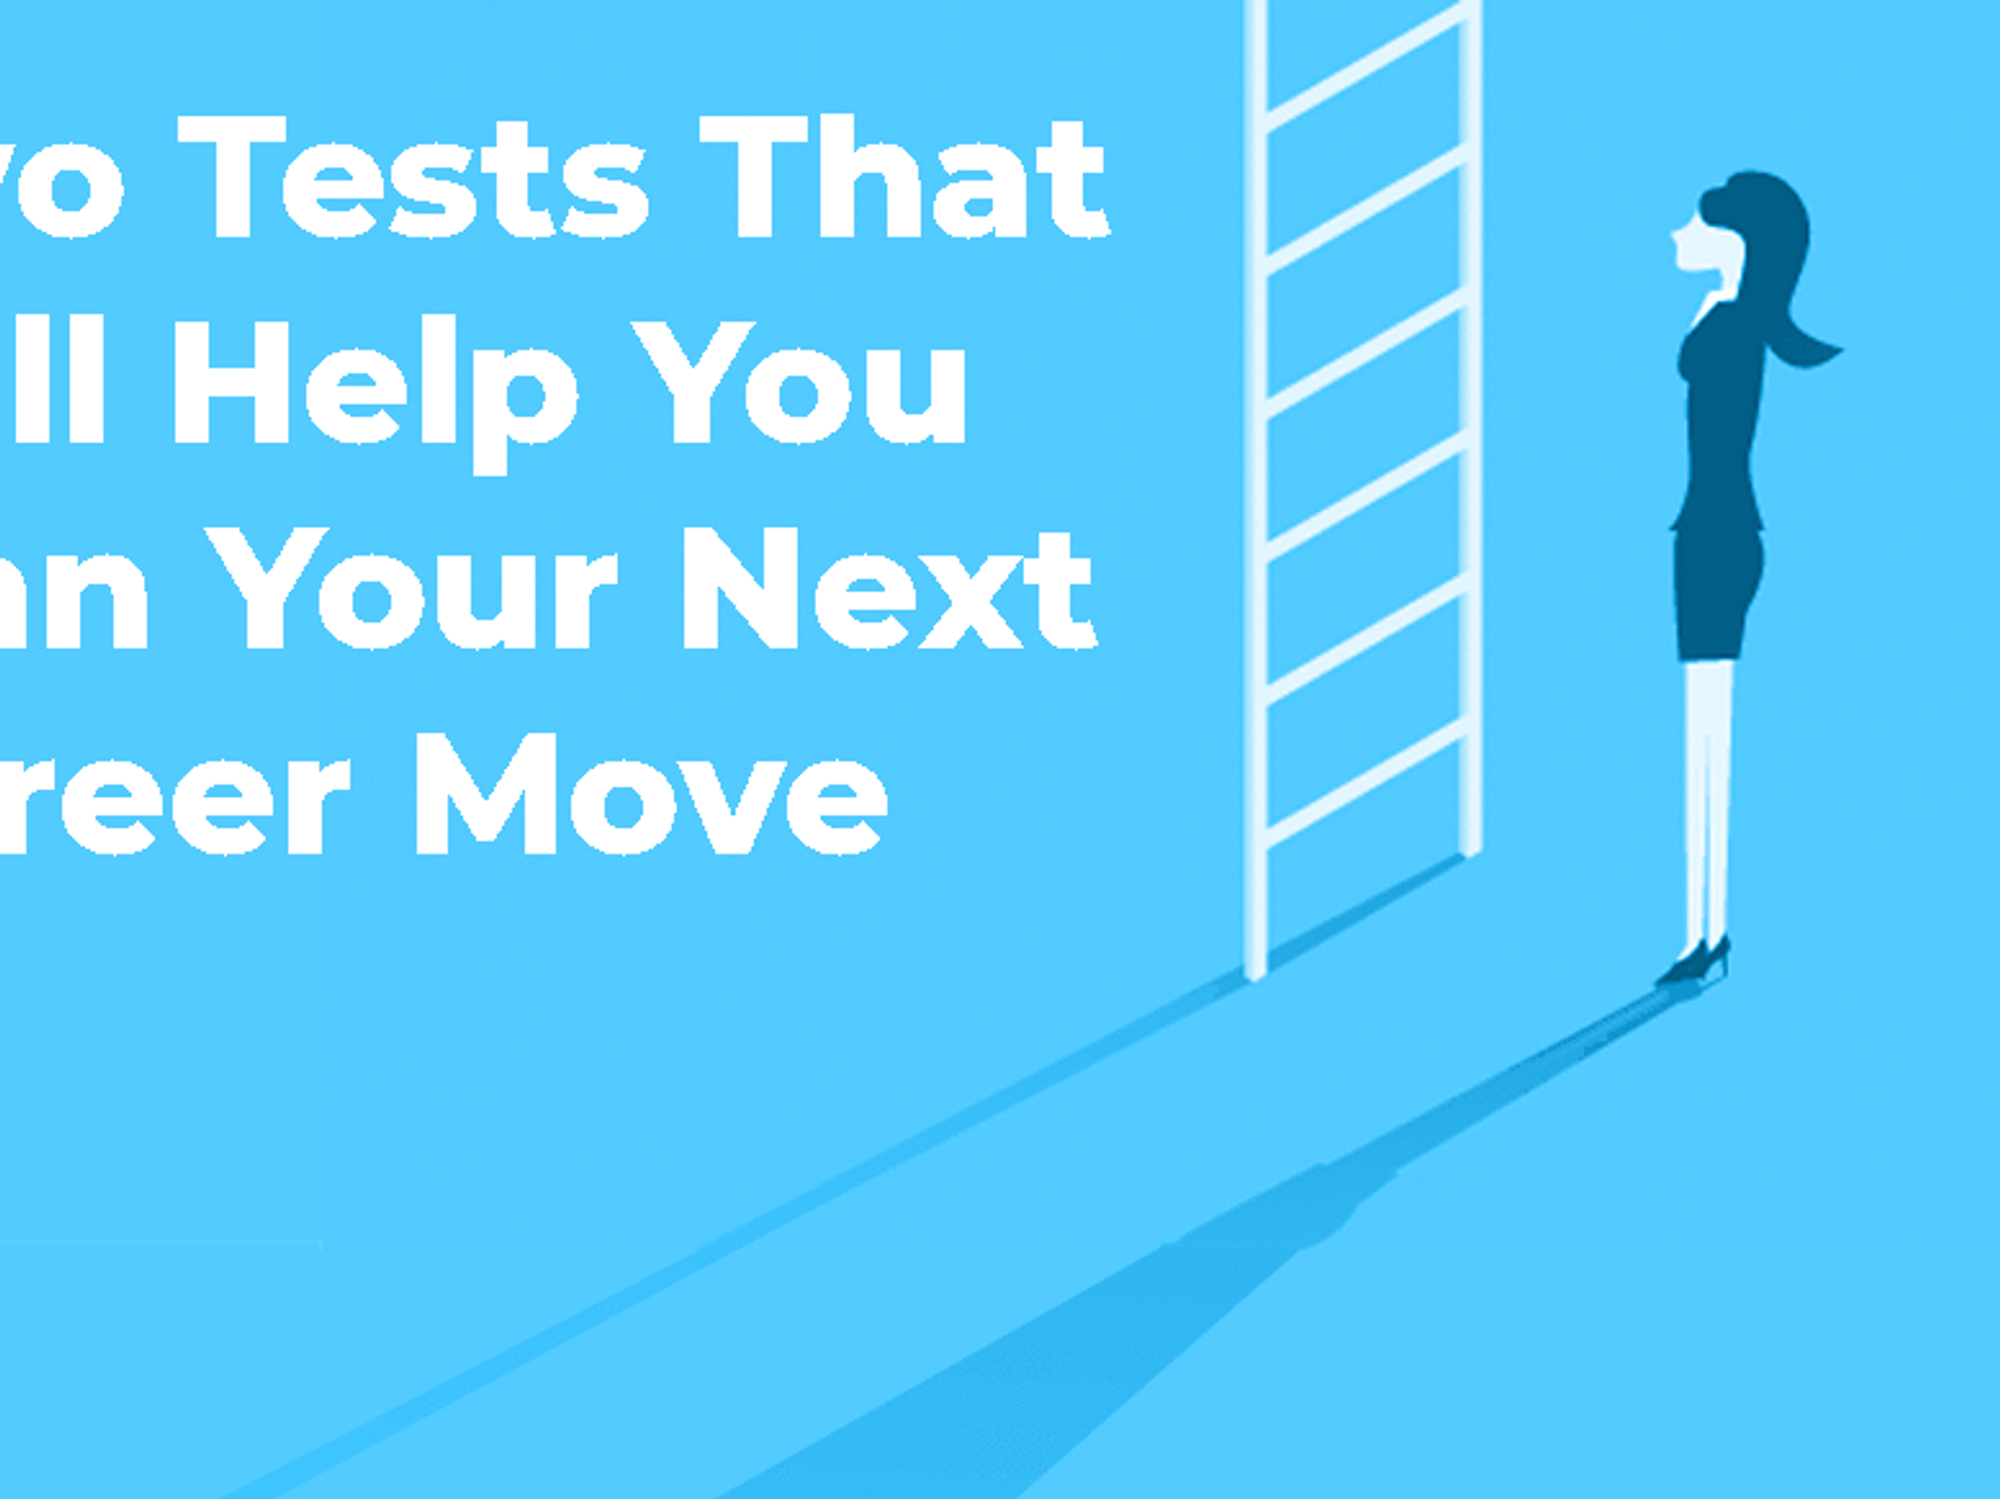 Two Tests That Will Help You Plan Your Next Career Move